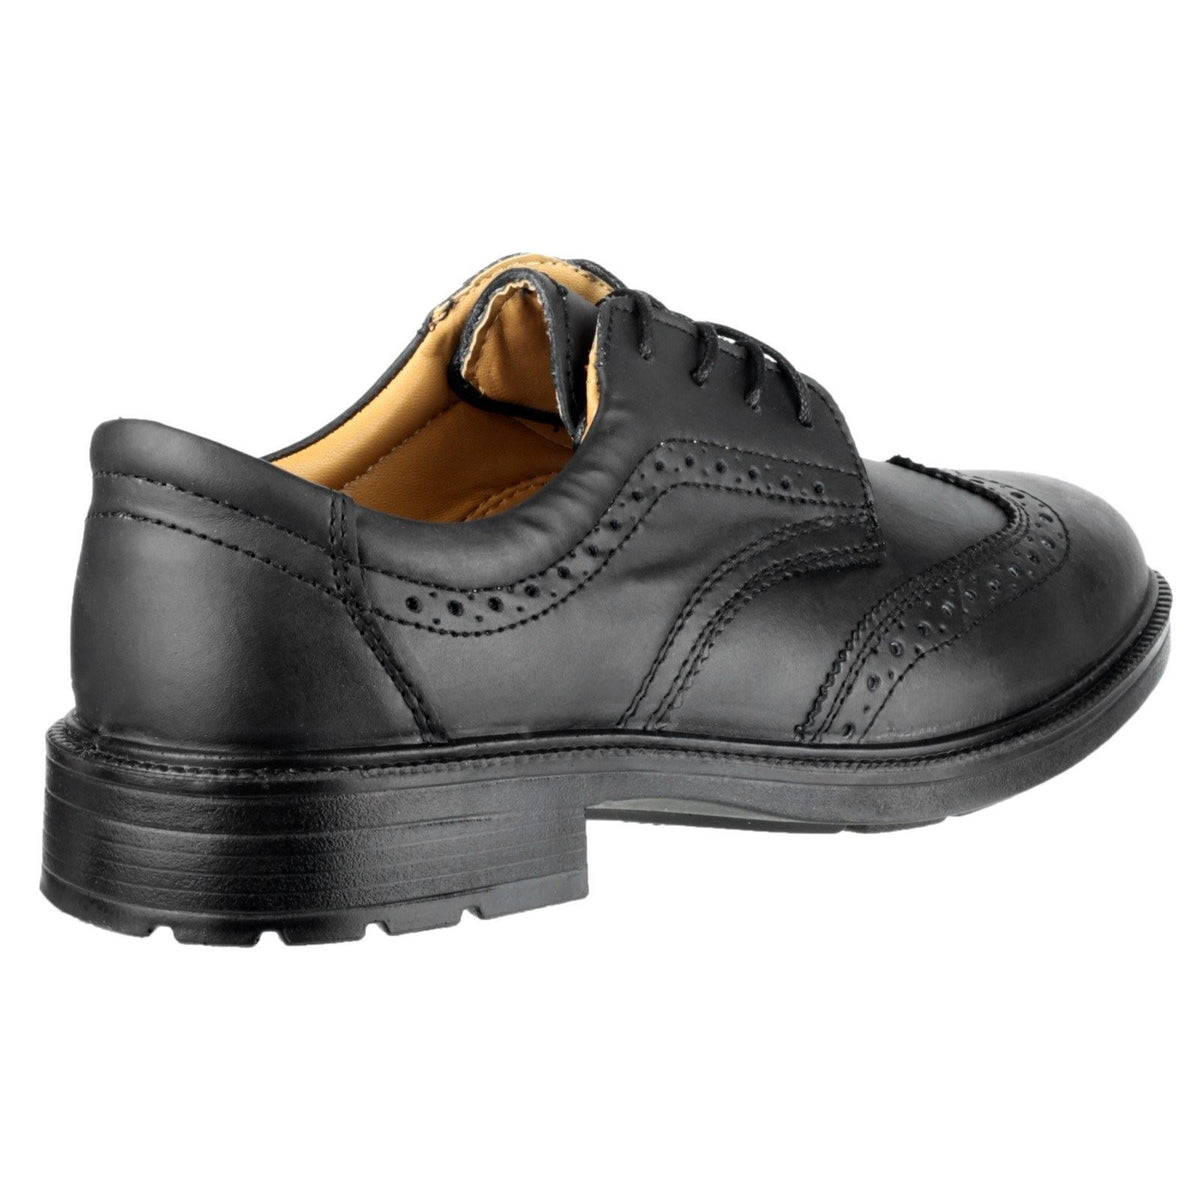 Amblers Safety FS44 Safety Brogue Formal Shoes